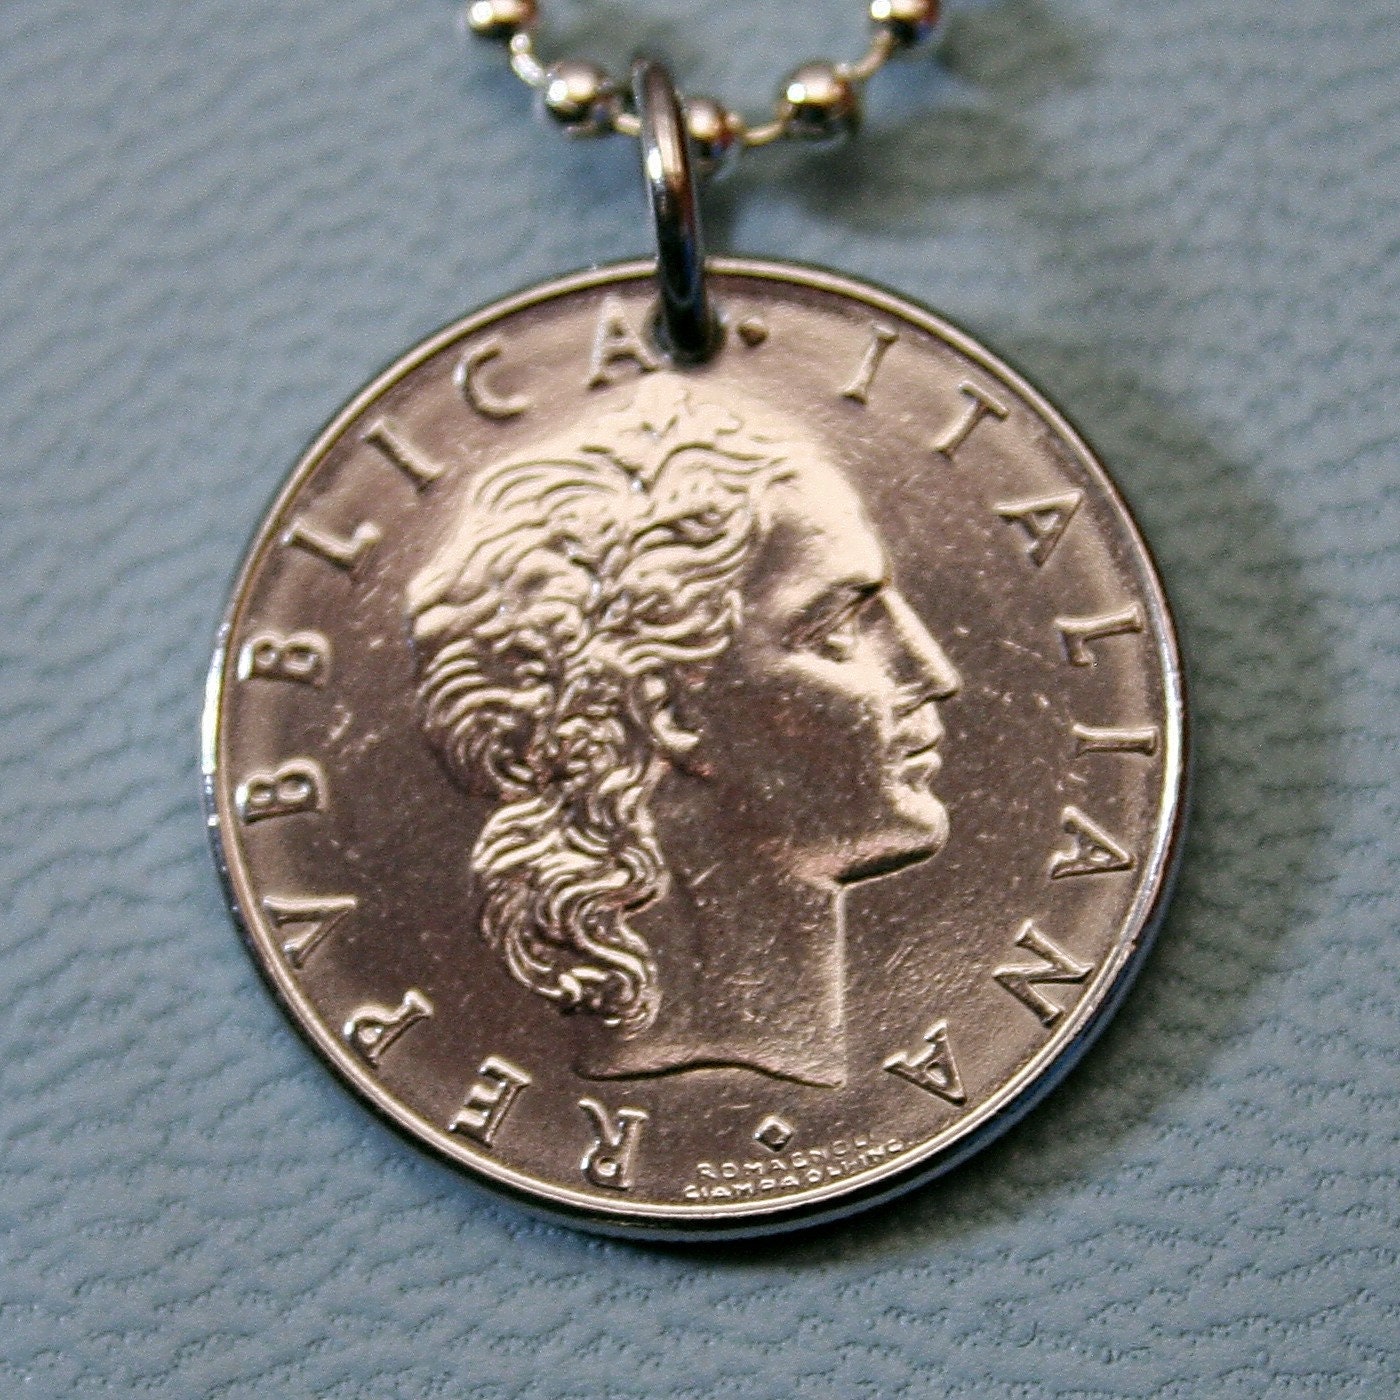 SILVER NECKLACE 1955 to 1989 PICK YOUR YEAR ITALIAN 50 LIRA COIN